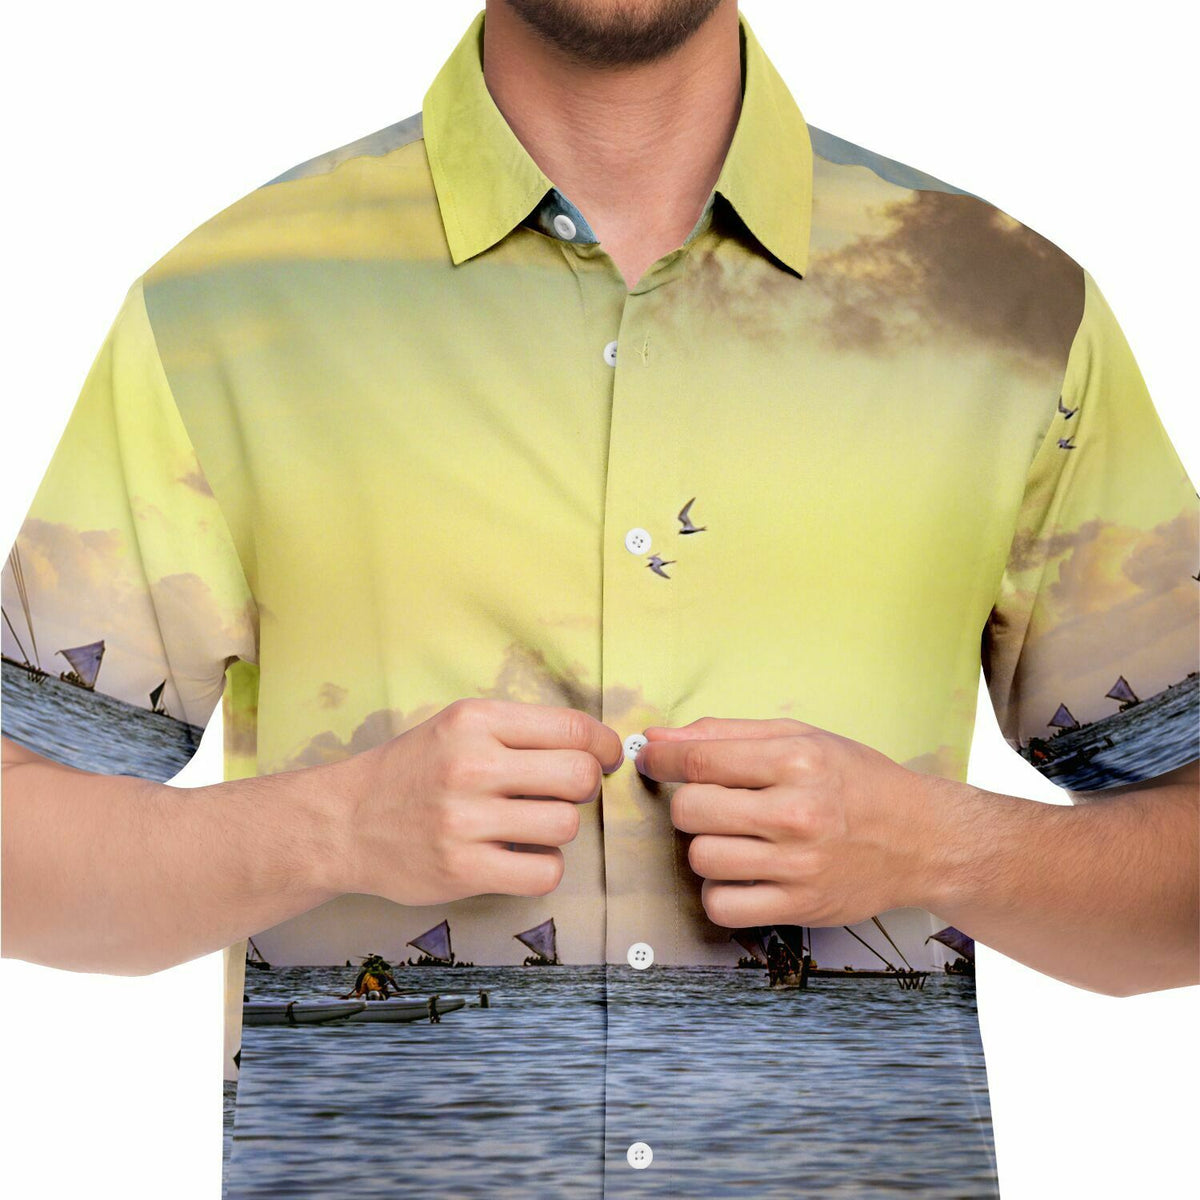 Traditional Canoe Welcome FestPac 2016 Short Sleeve Button Down Shirt